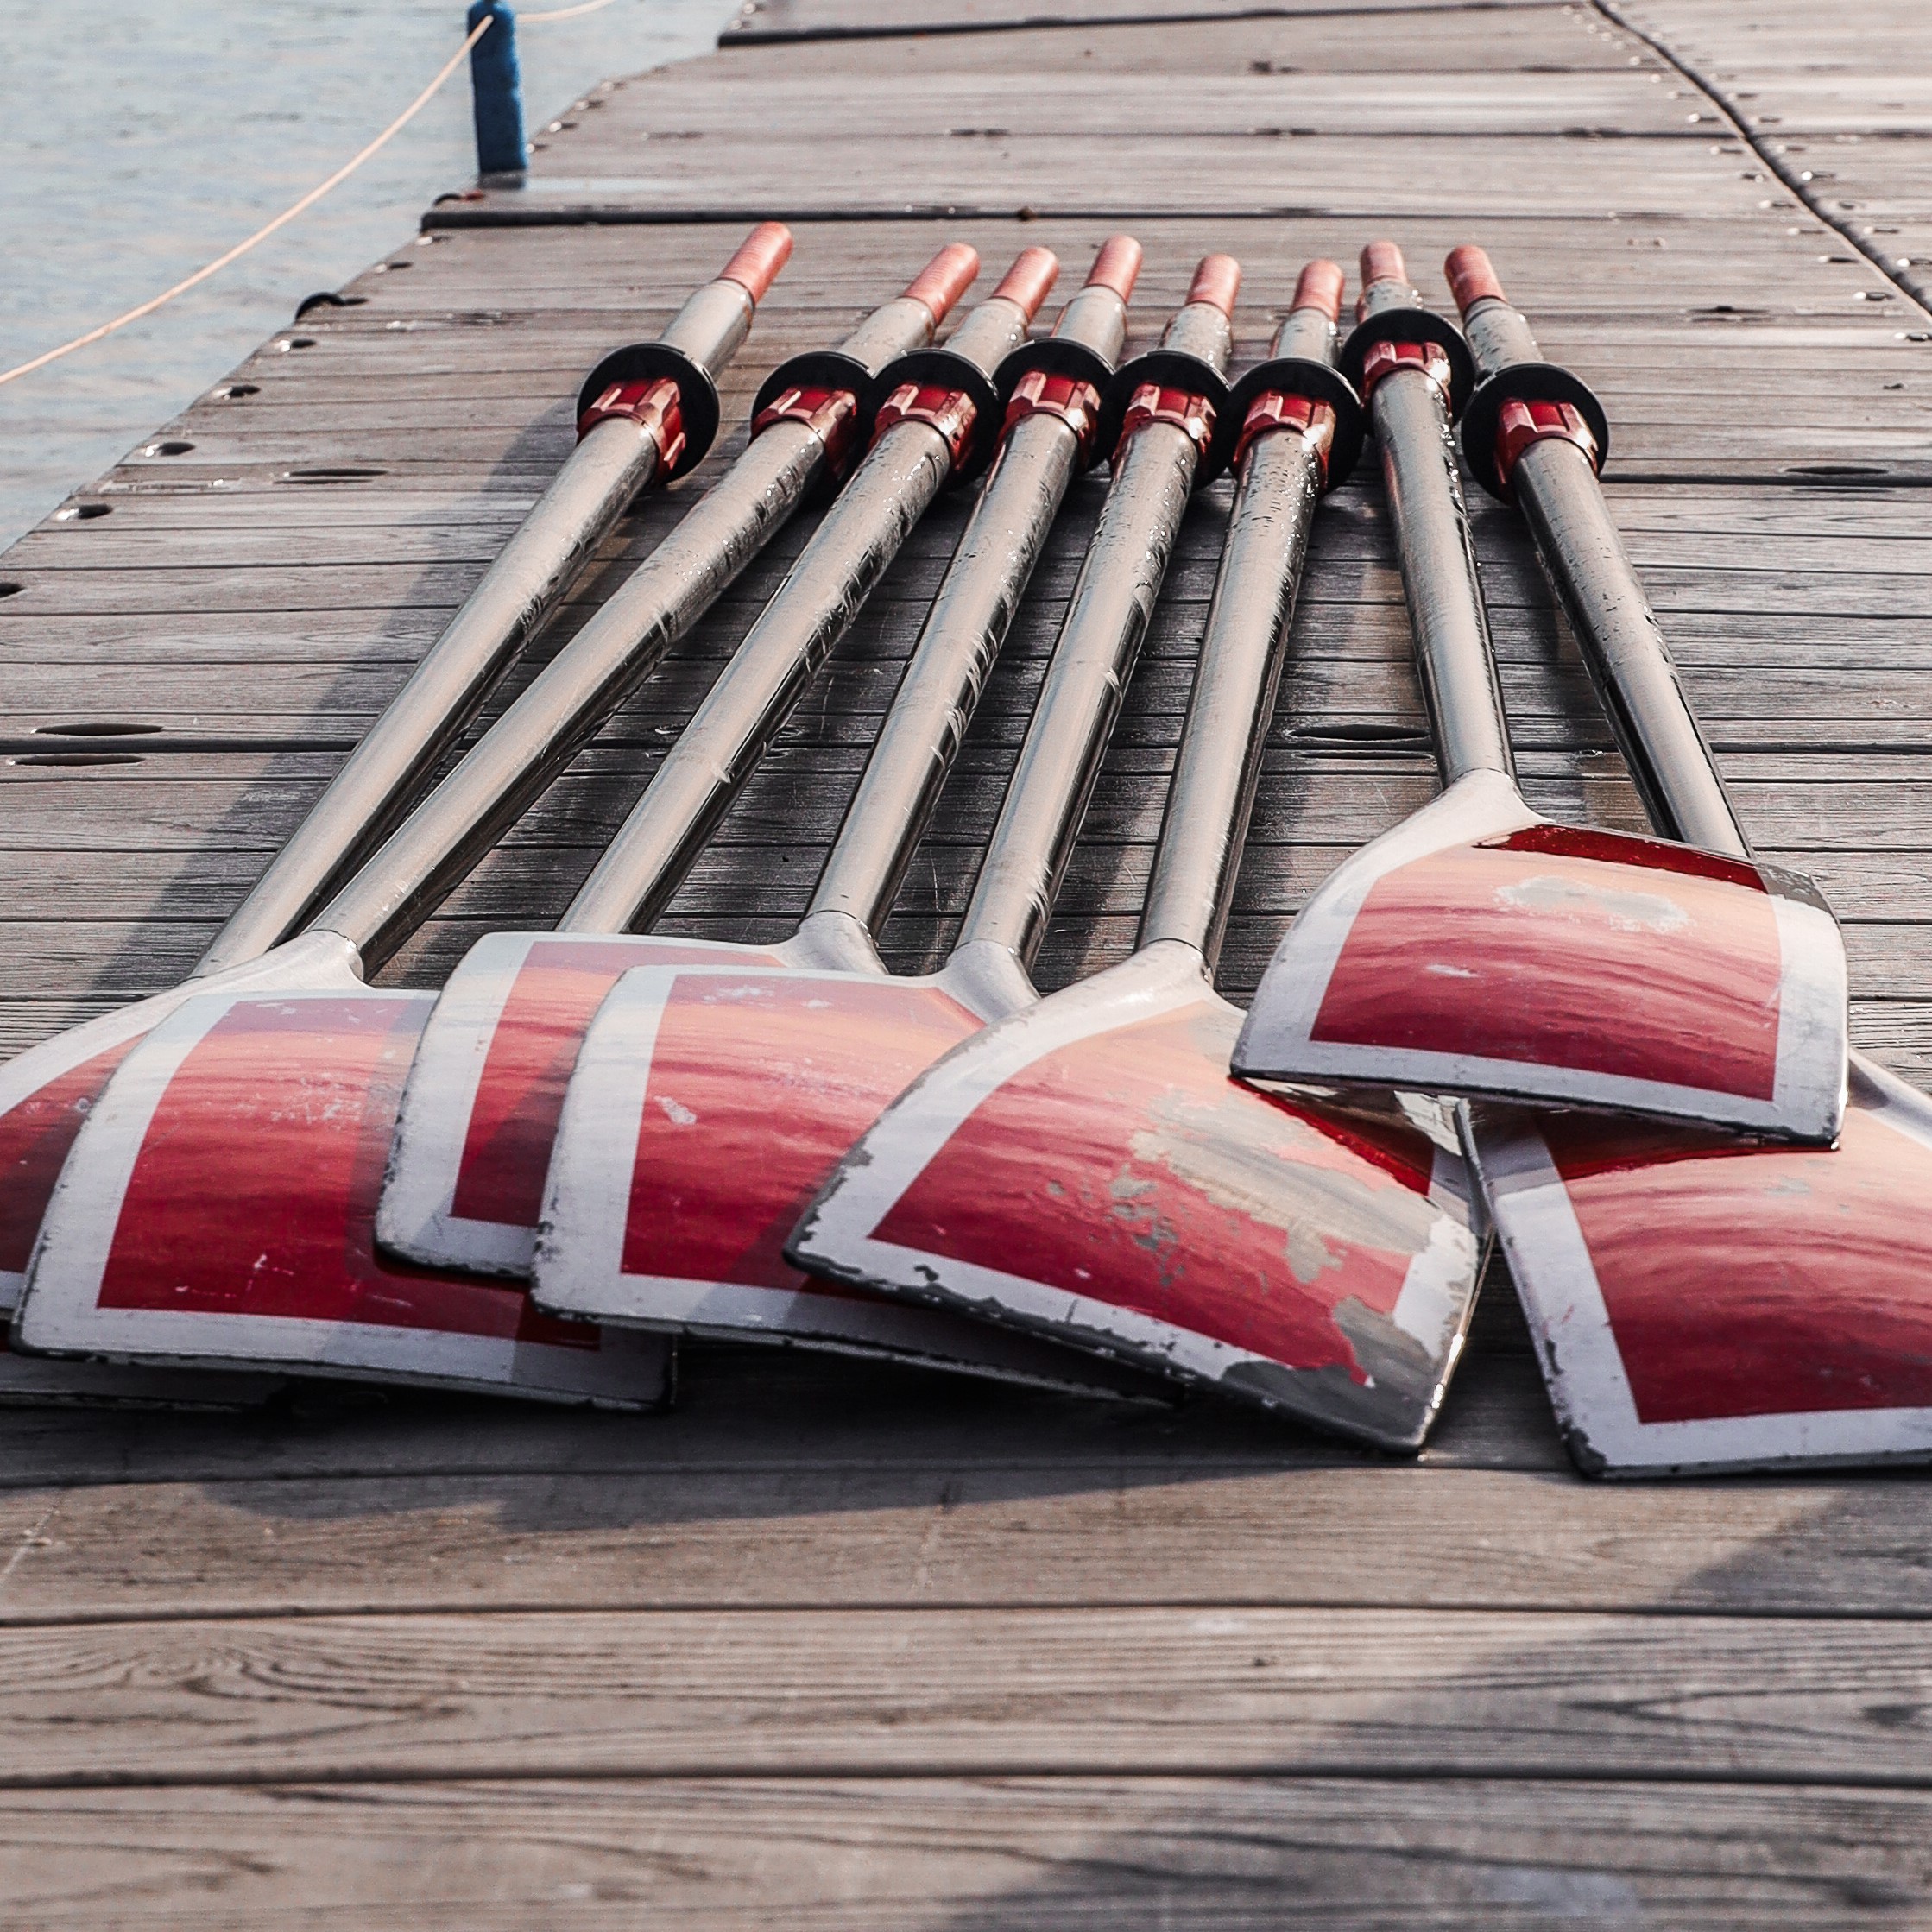 Several oars on the dock.